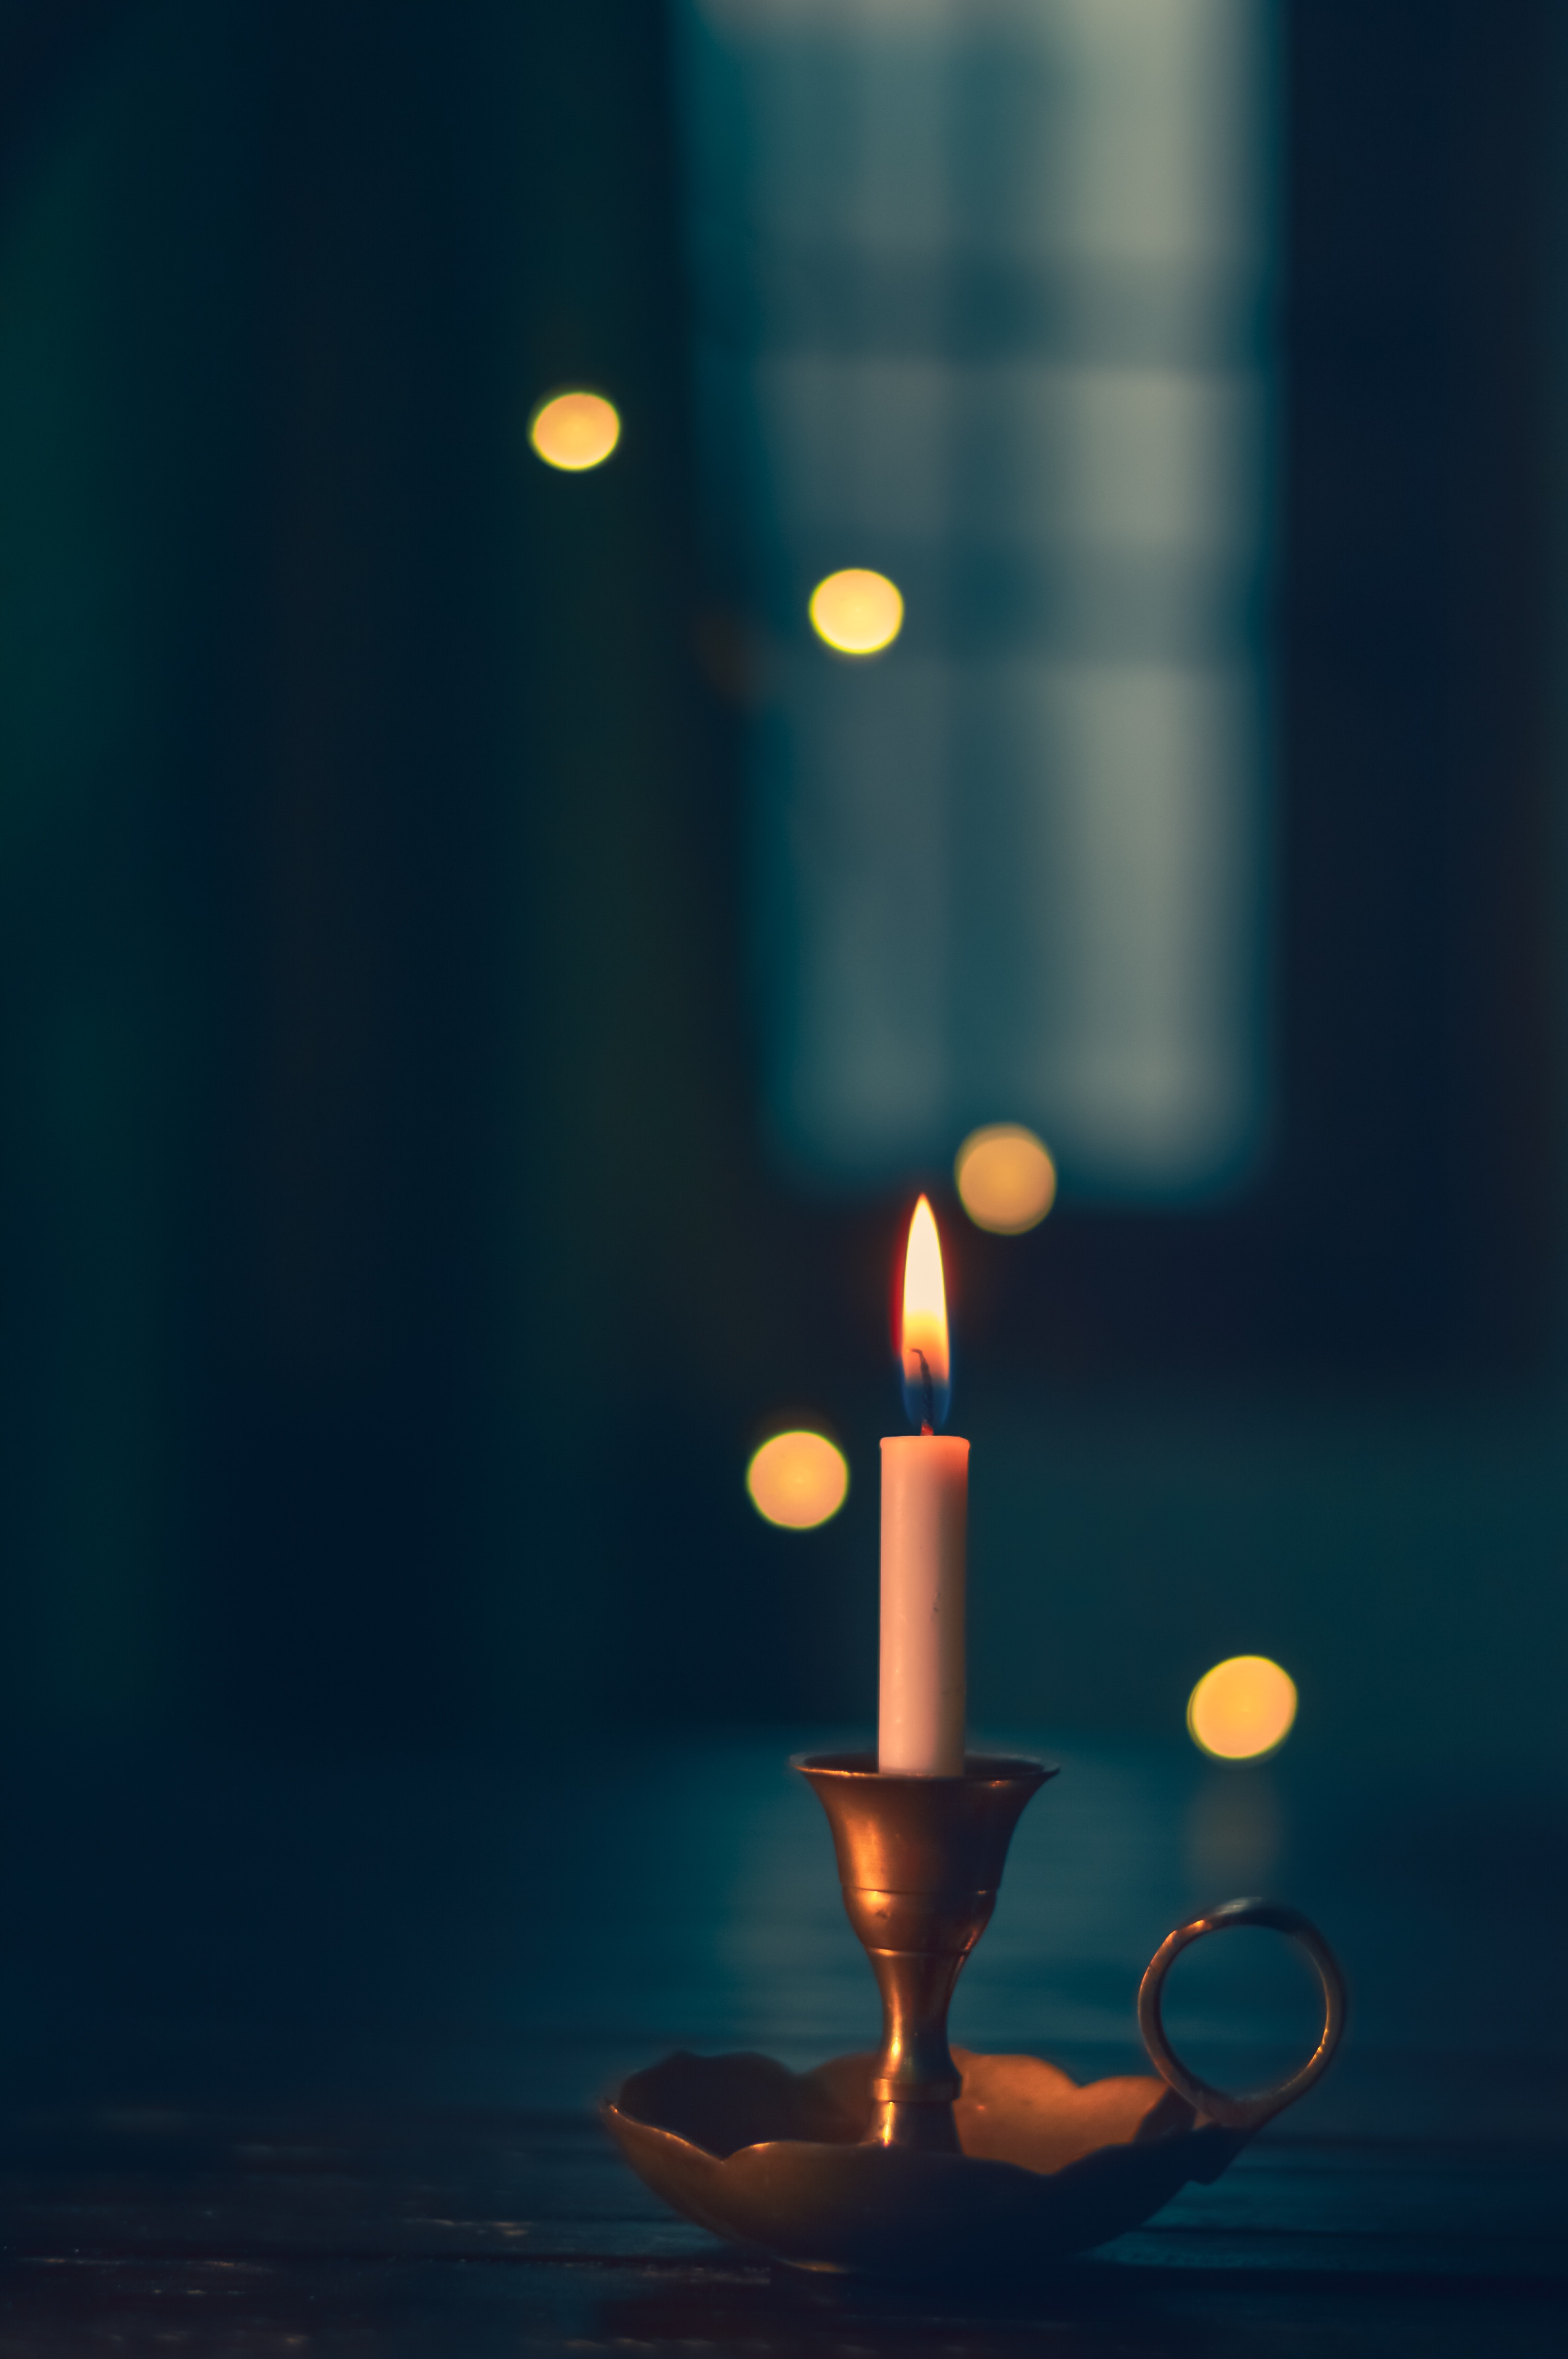 miscellanea, blur, wax, candle, candlestick, fire, miscellaneous, smooth, wick